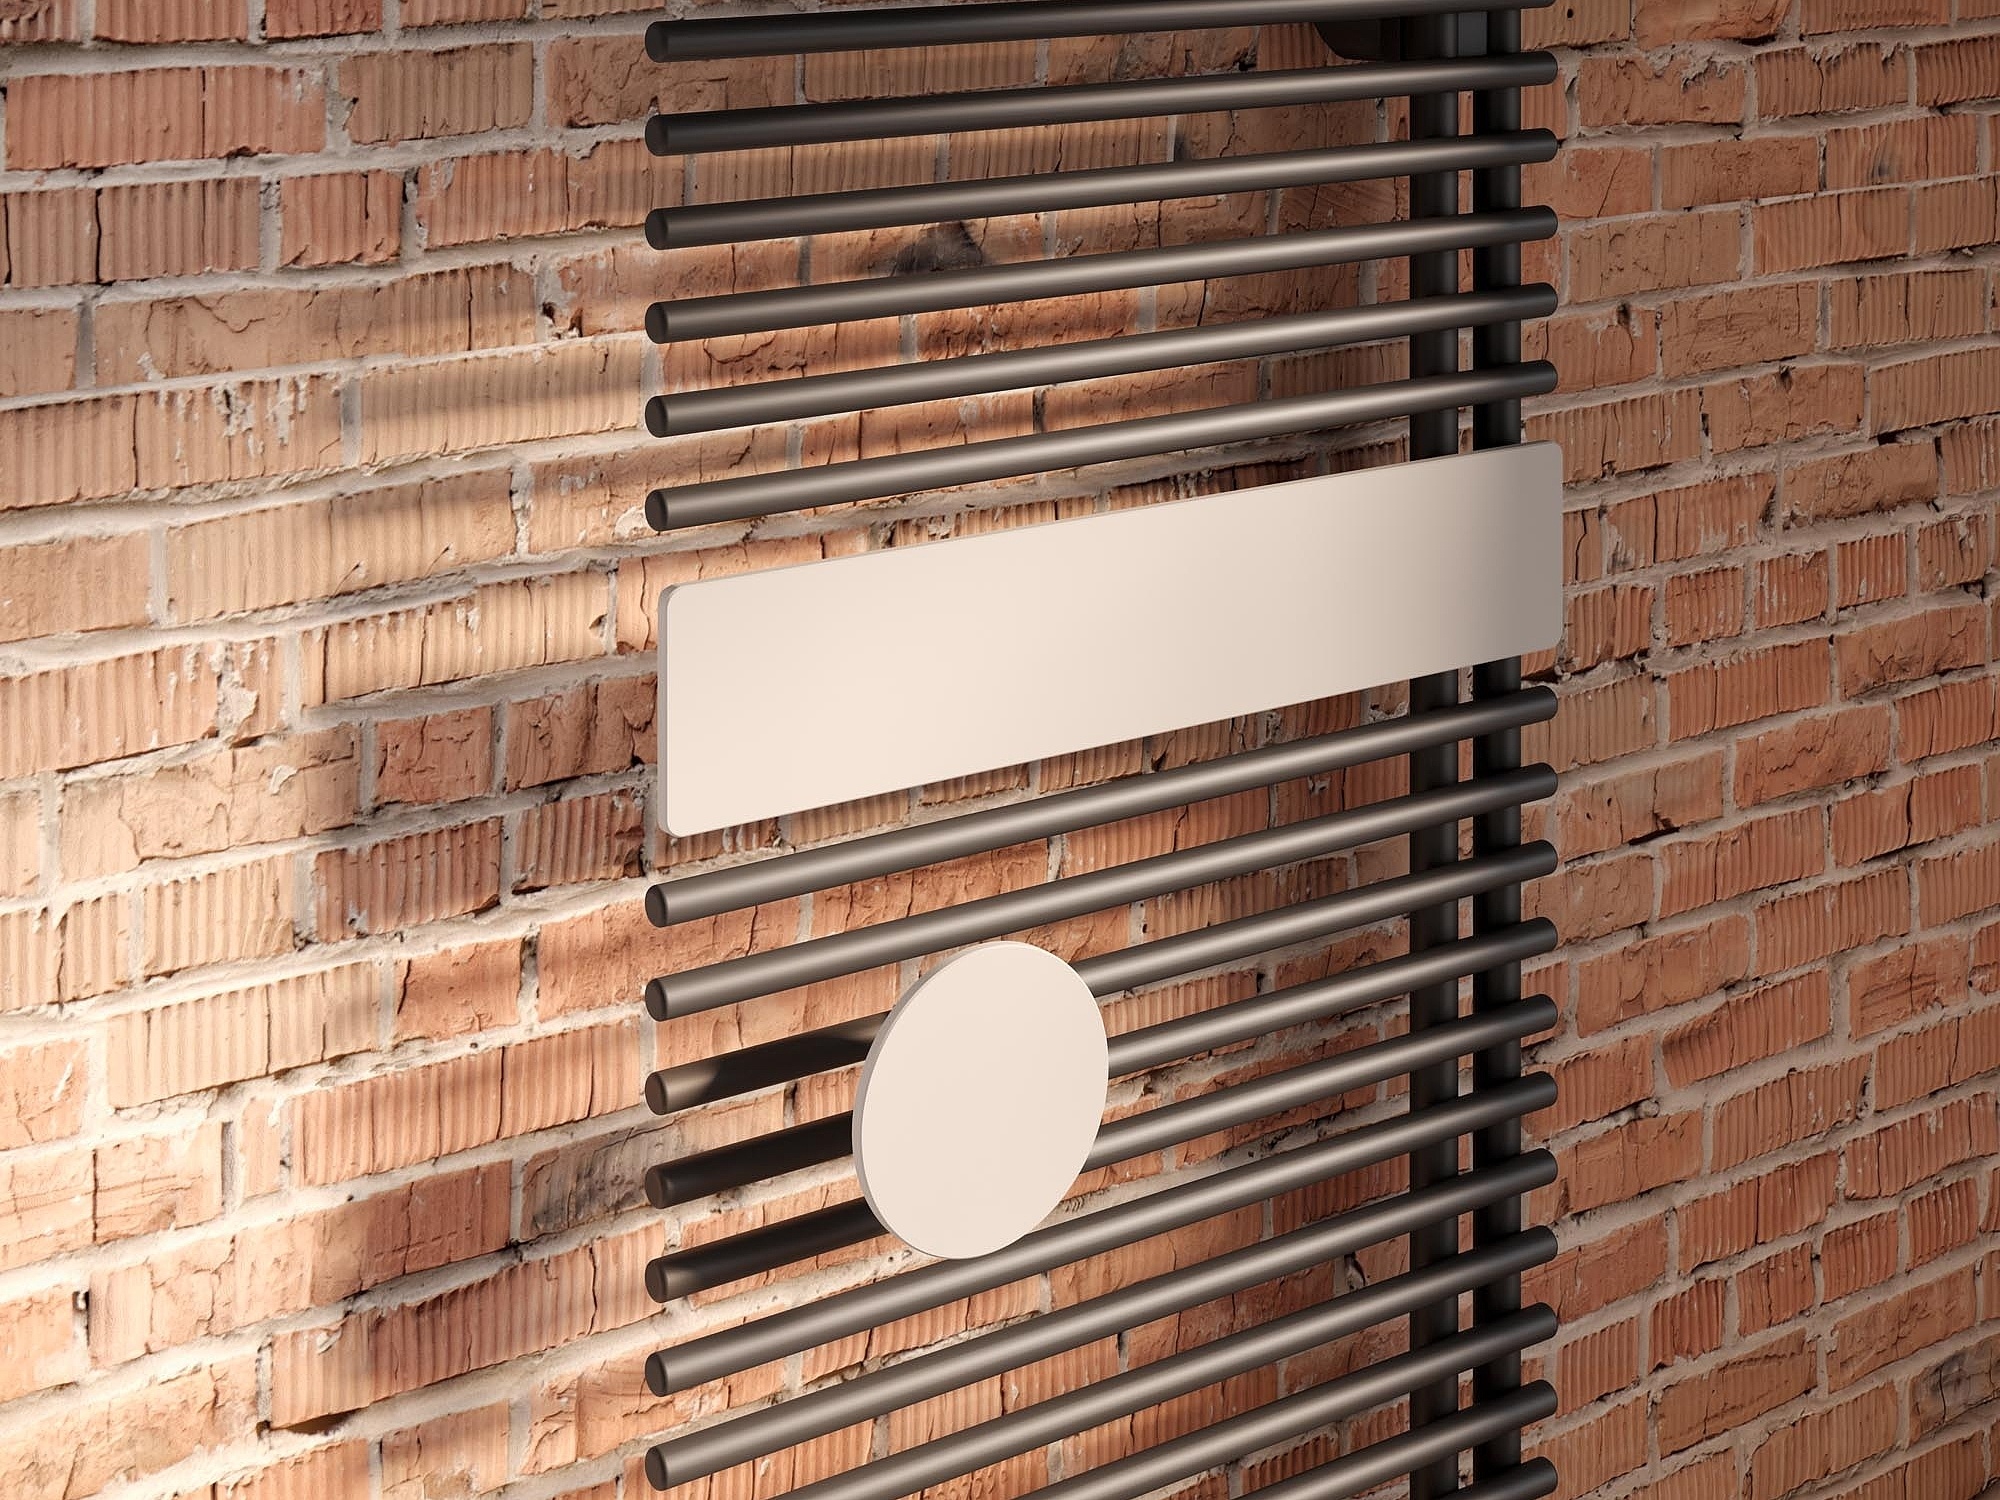 Kermi Credo Half round design and bathroom radiators, large choice of colours available for design element.